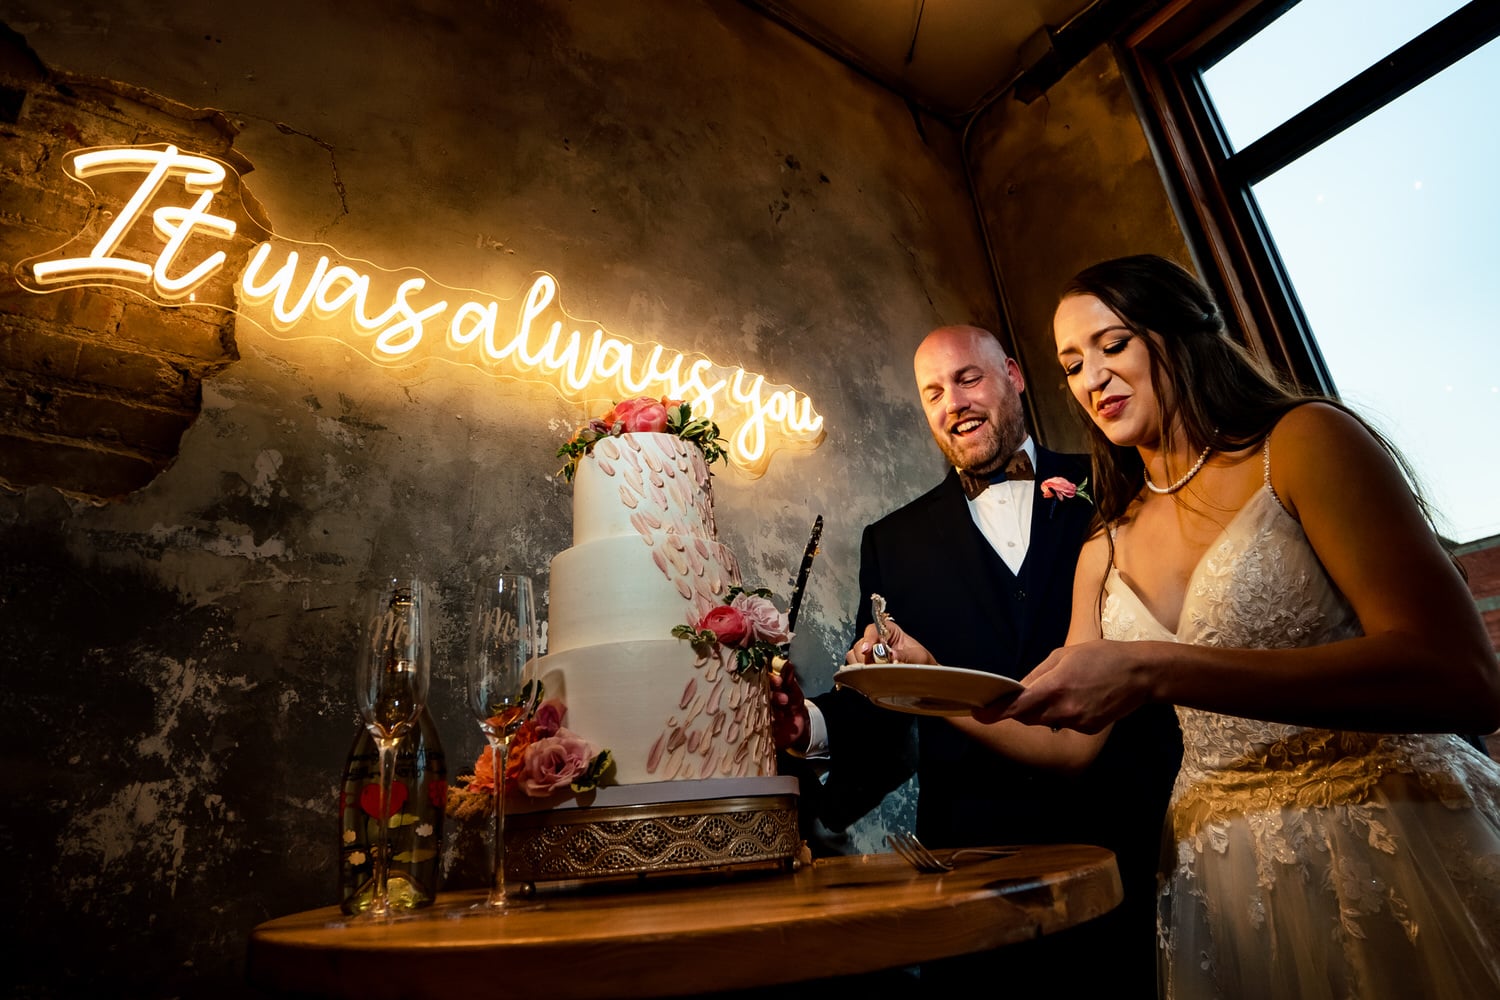 A colorful, candid picture of a bride and groom getting ready to feed each other wedding cake, a neon, "it was always you" sign visible behind them. 